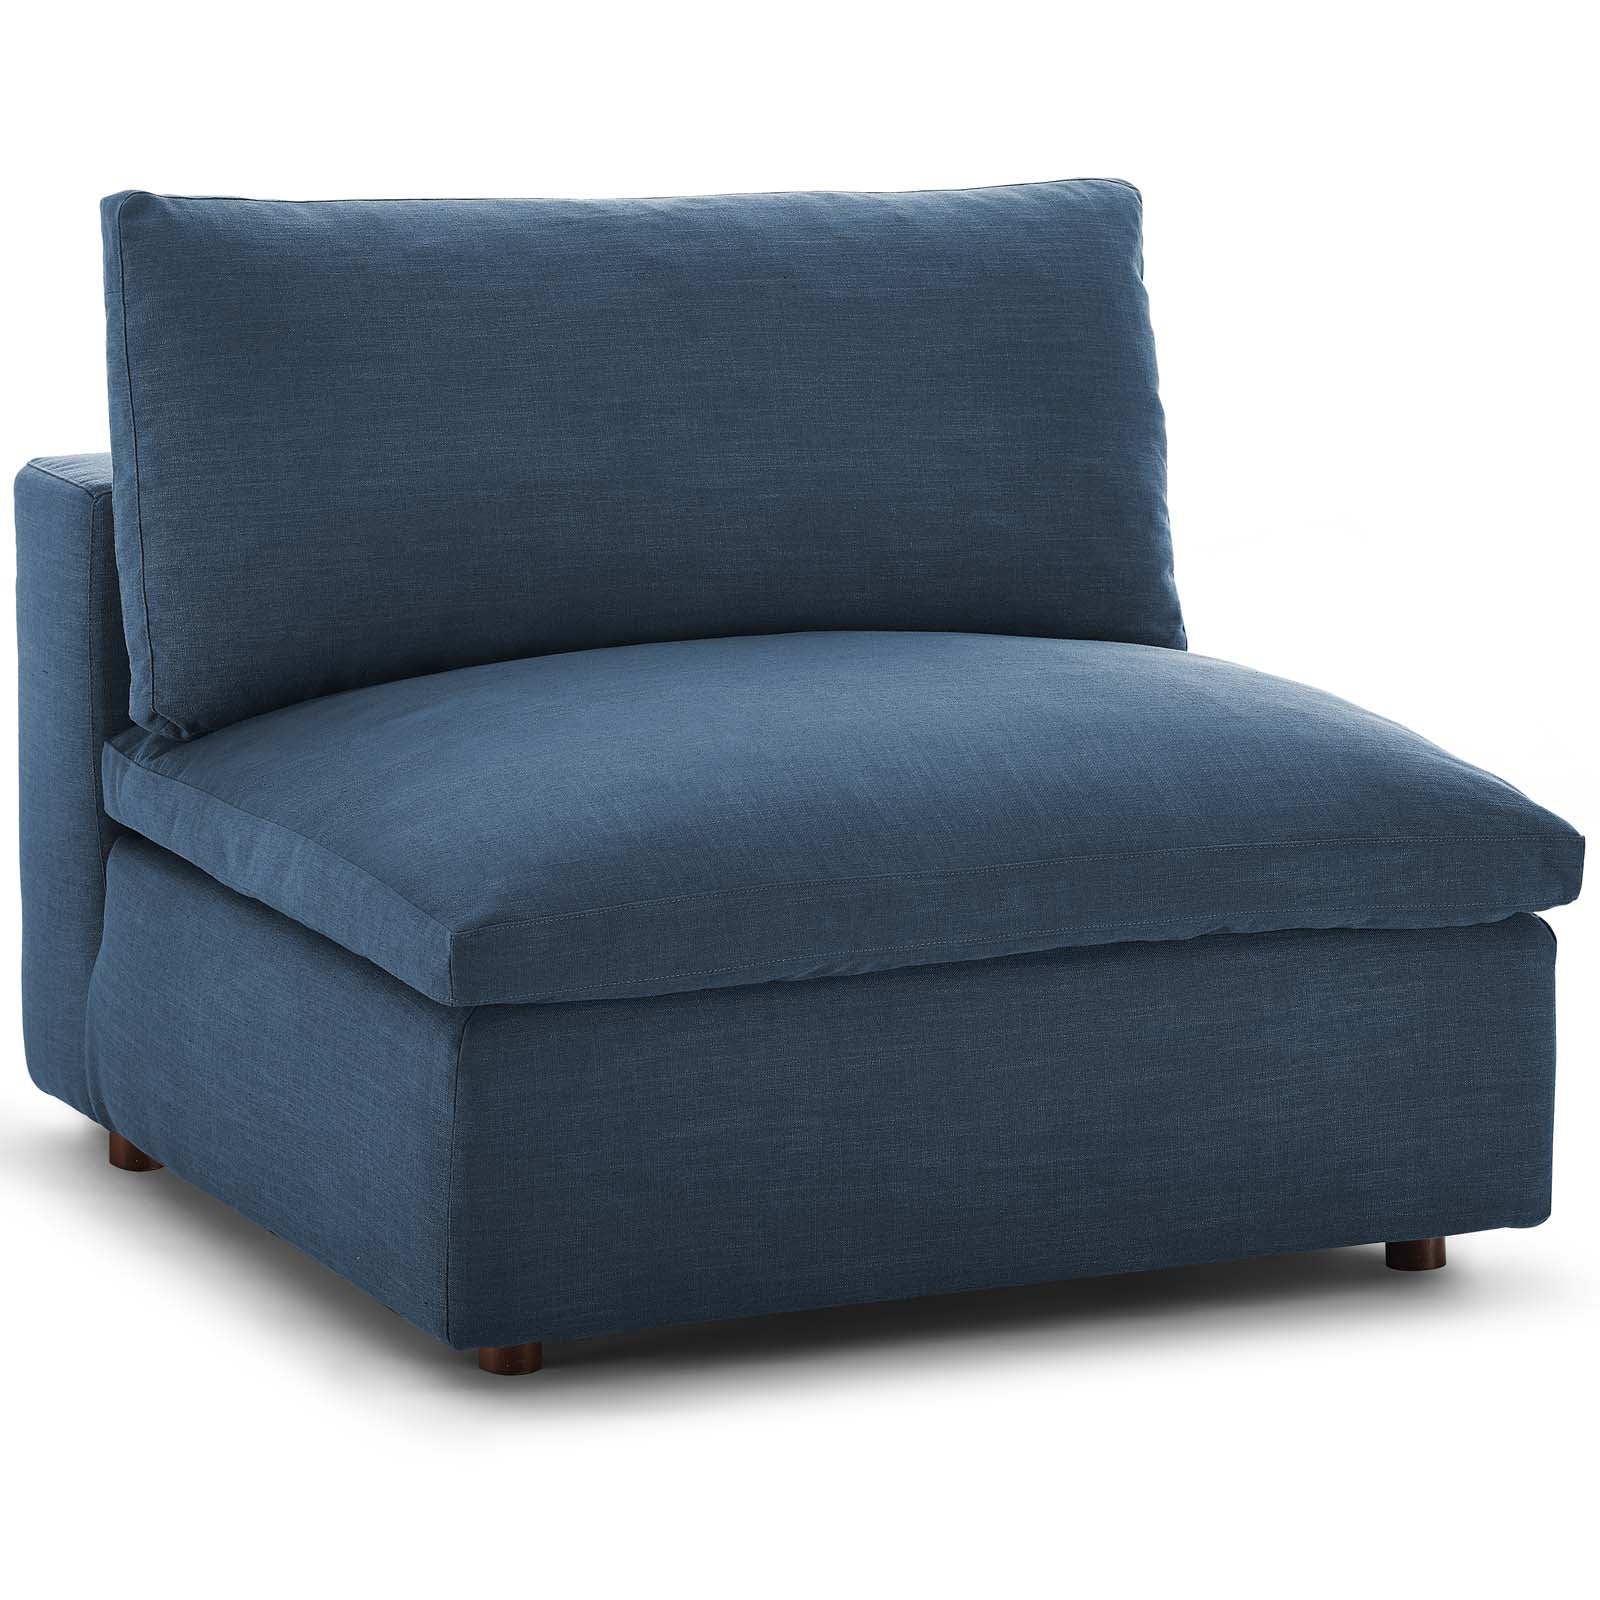 Occasional Commie Down Filled Overstuffed Armless Chair - Clean - Lined Modern Chair